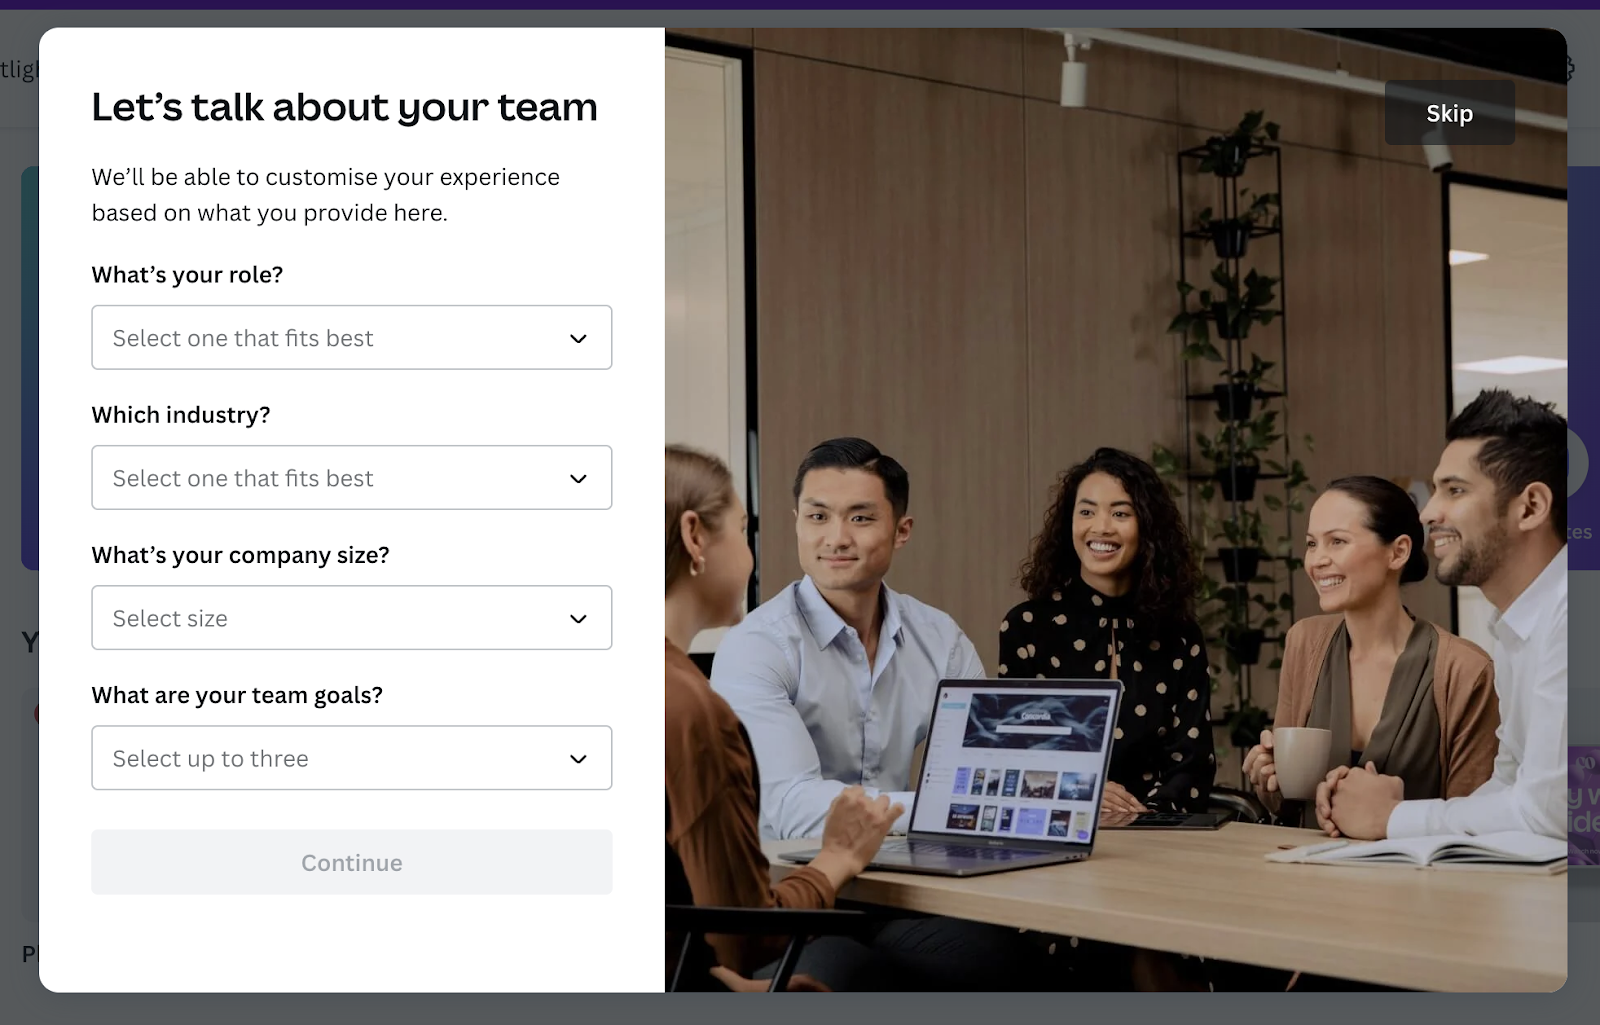 "Let's talk about your team" form in Canva